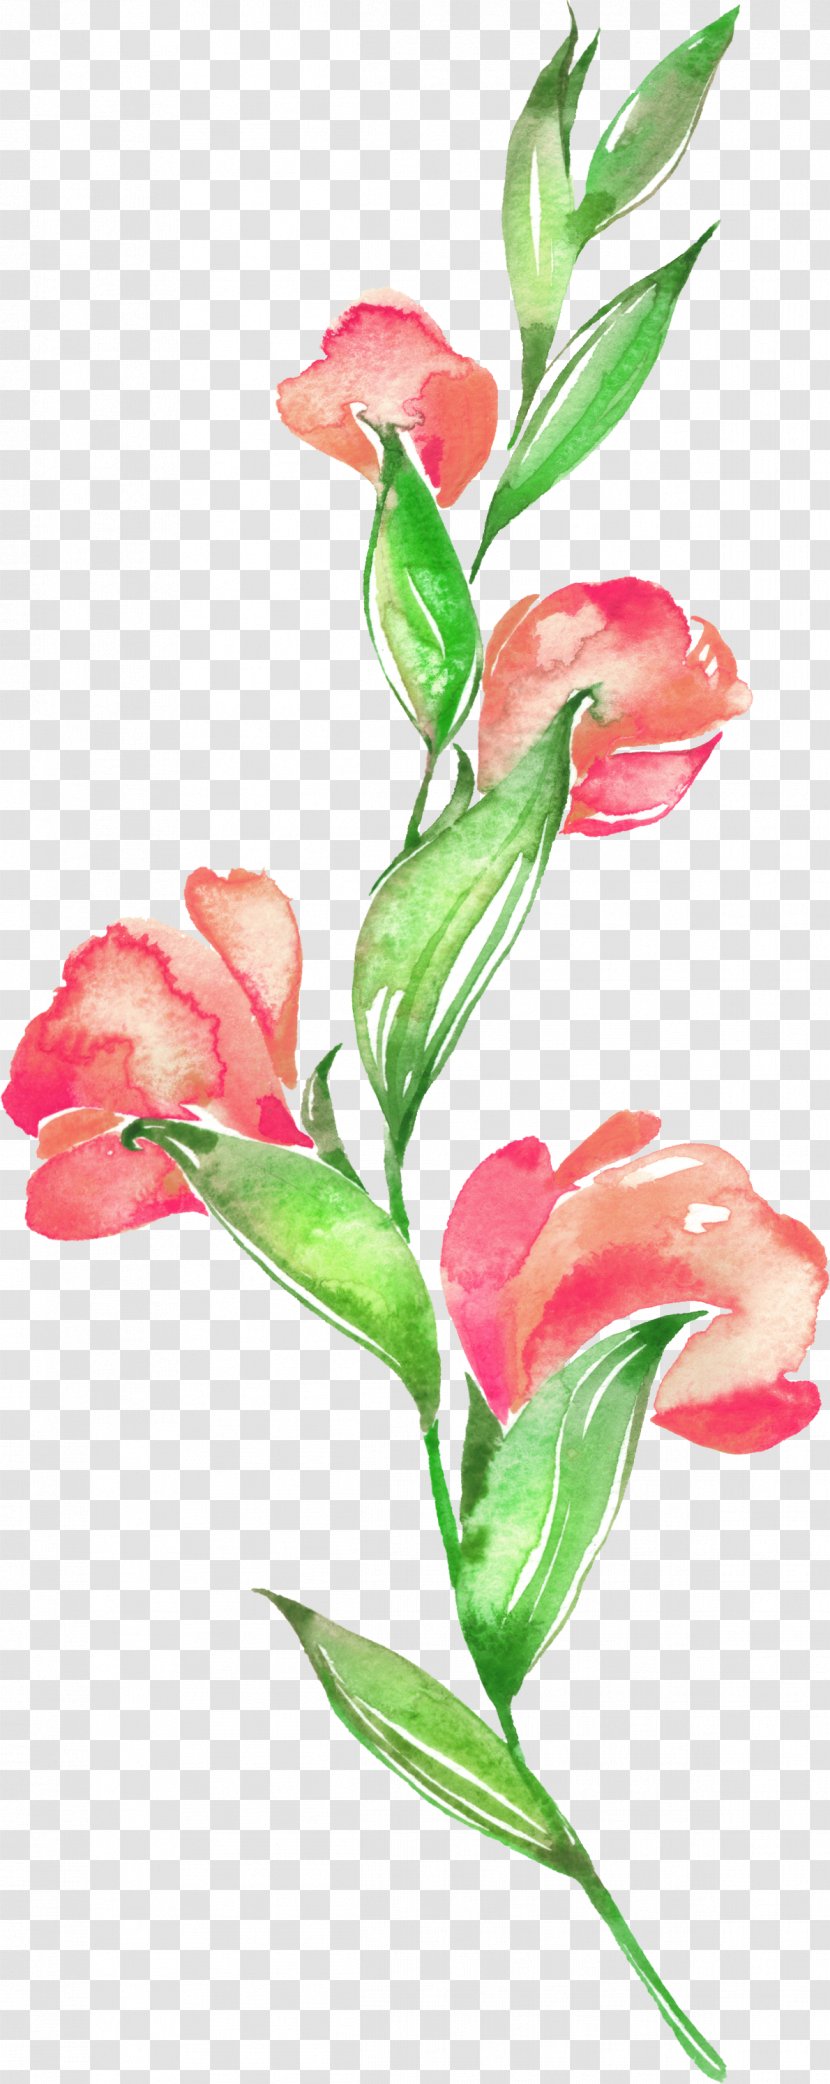 Floral Design Flower Watercolor Painting - Material Background Transparent PNG